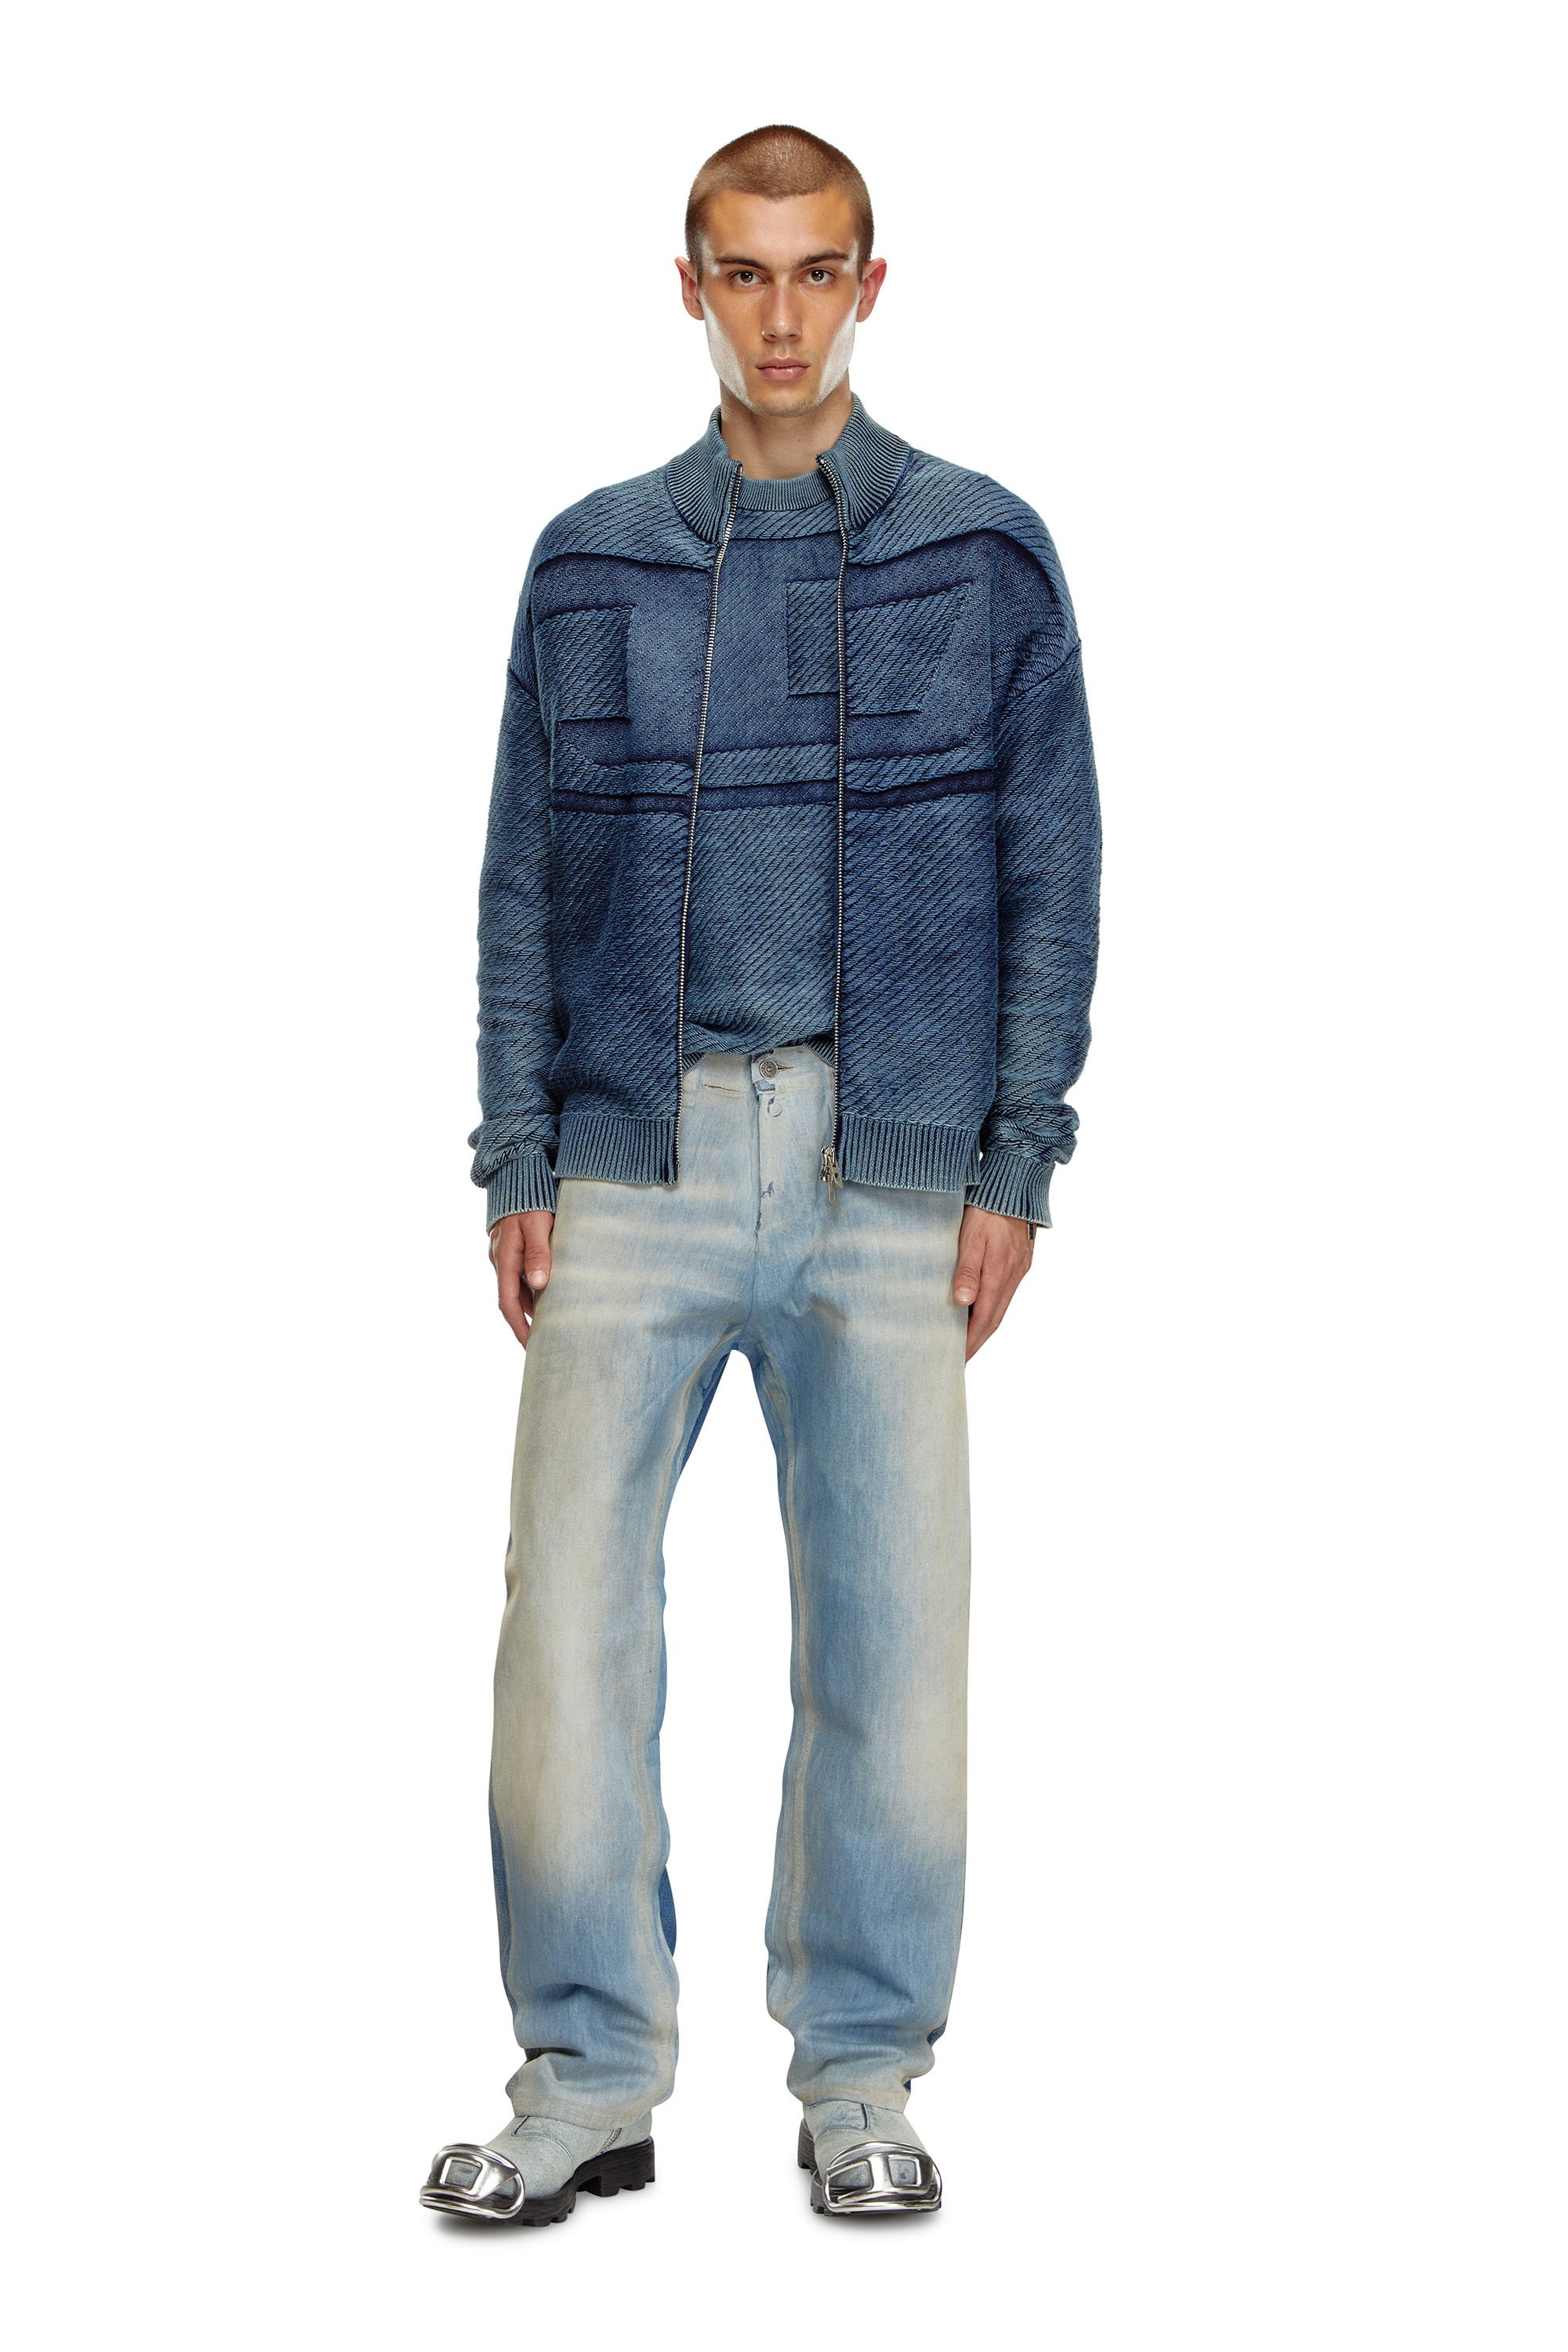 Diesel - Straight Jeans 2010 D-Macs 09K22, Hombre Straight Jeans - 2010 D-Macs in Azul marino - Image 2